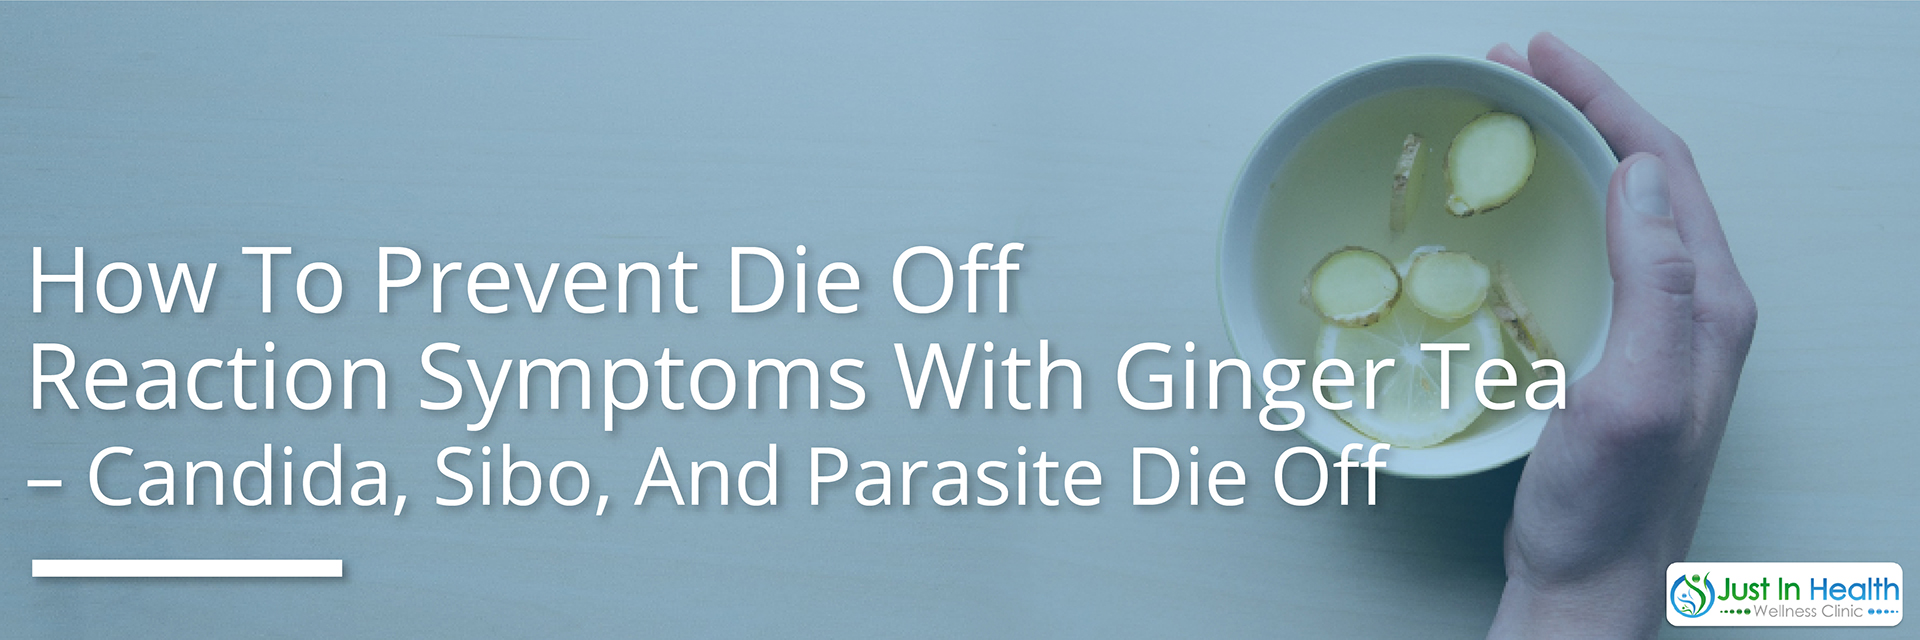 How To Prevent Die Off Reactions Using Giinger Tea